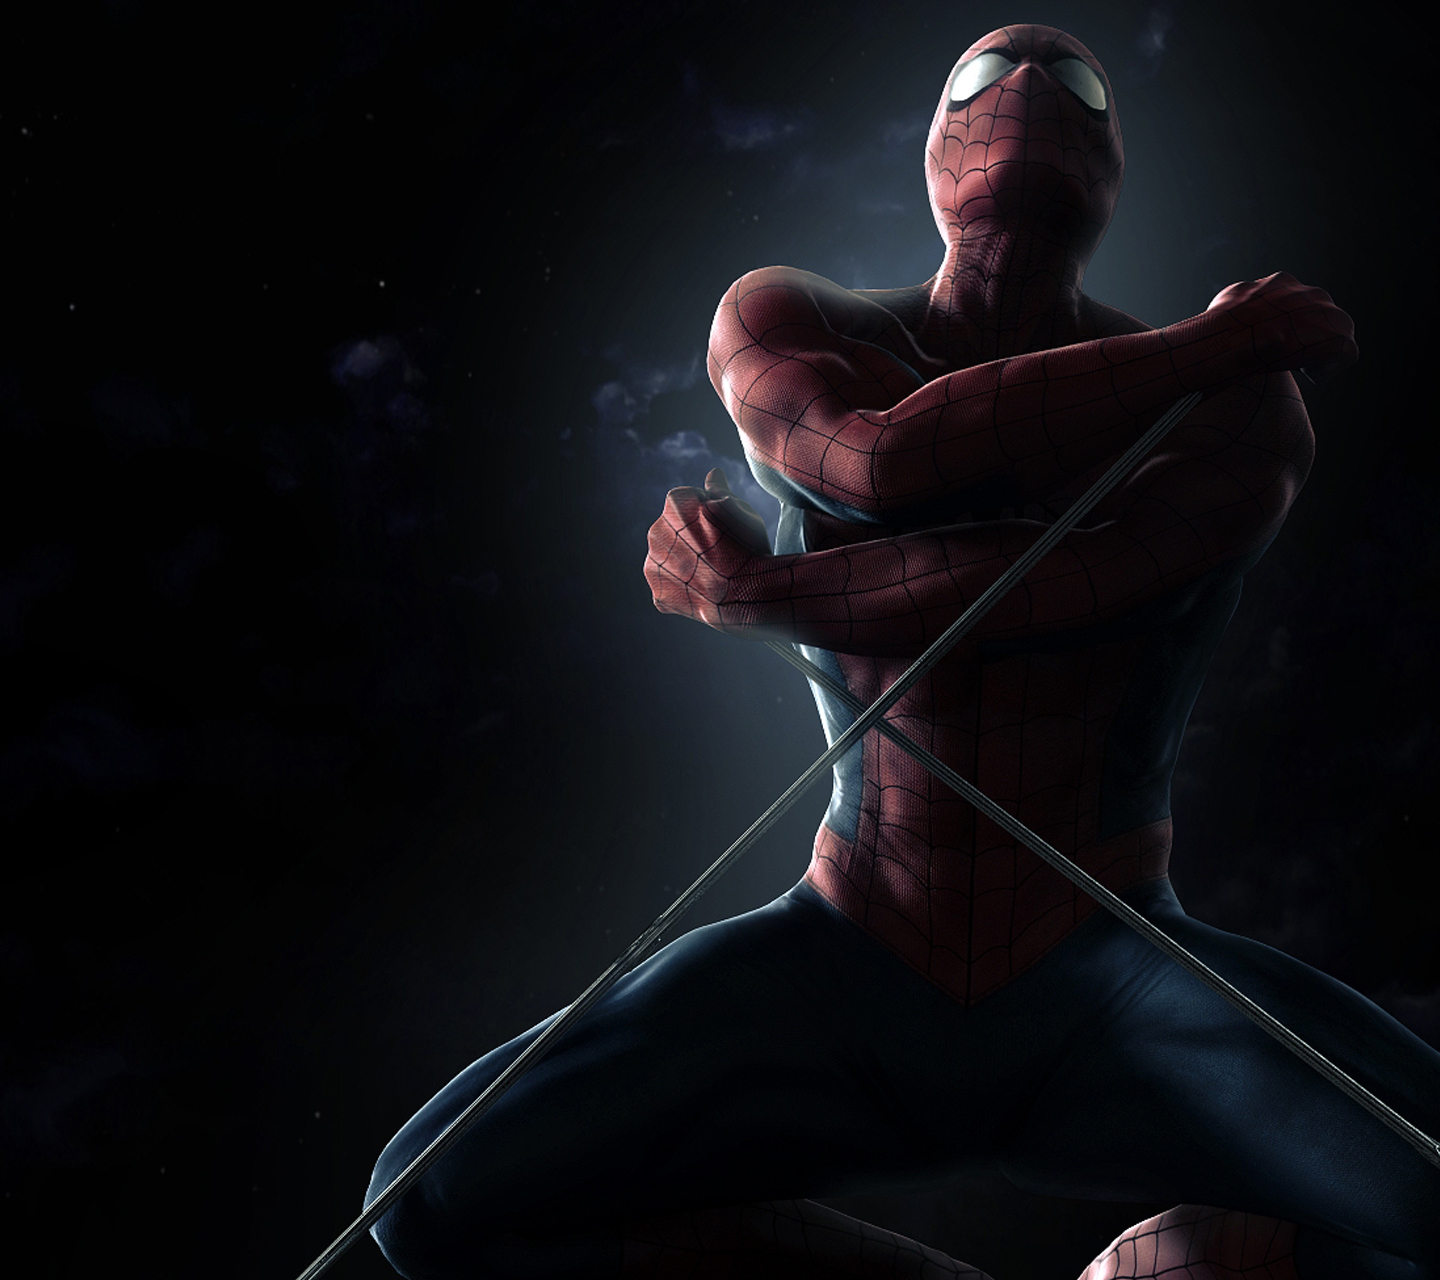 Image Of Awesome Spiderman Wallpaper Marvel Htm